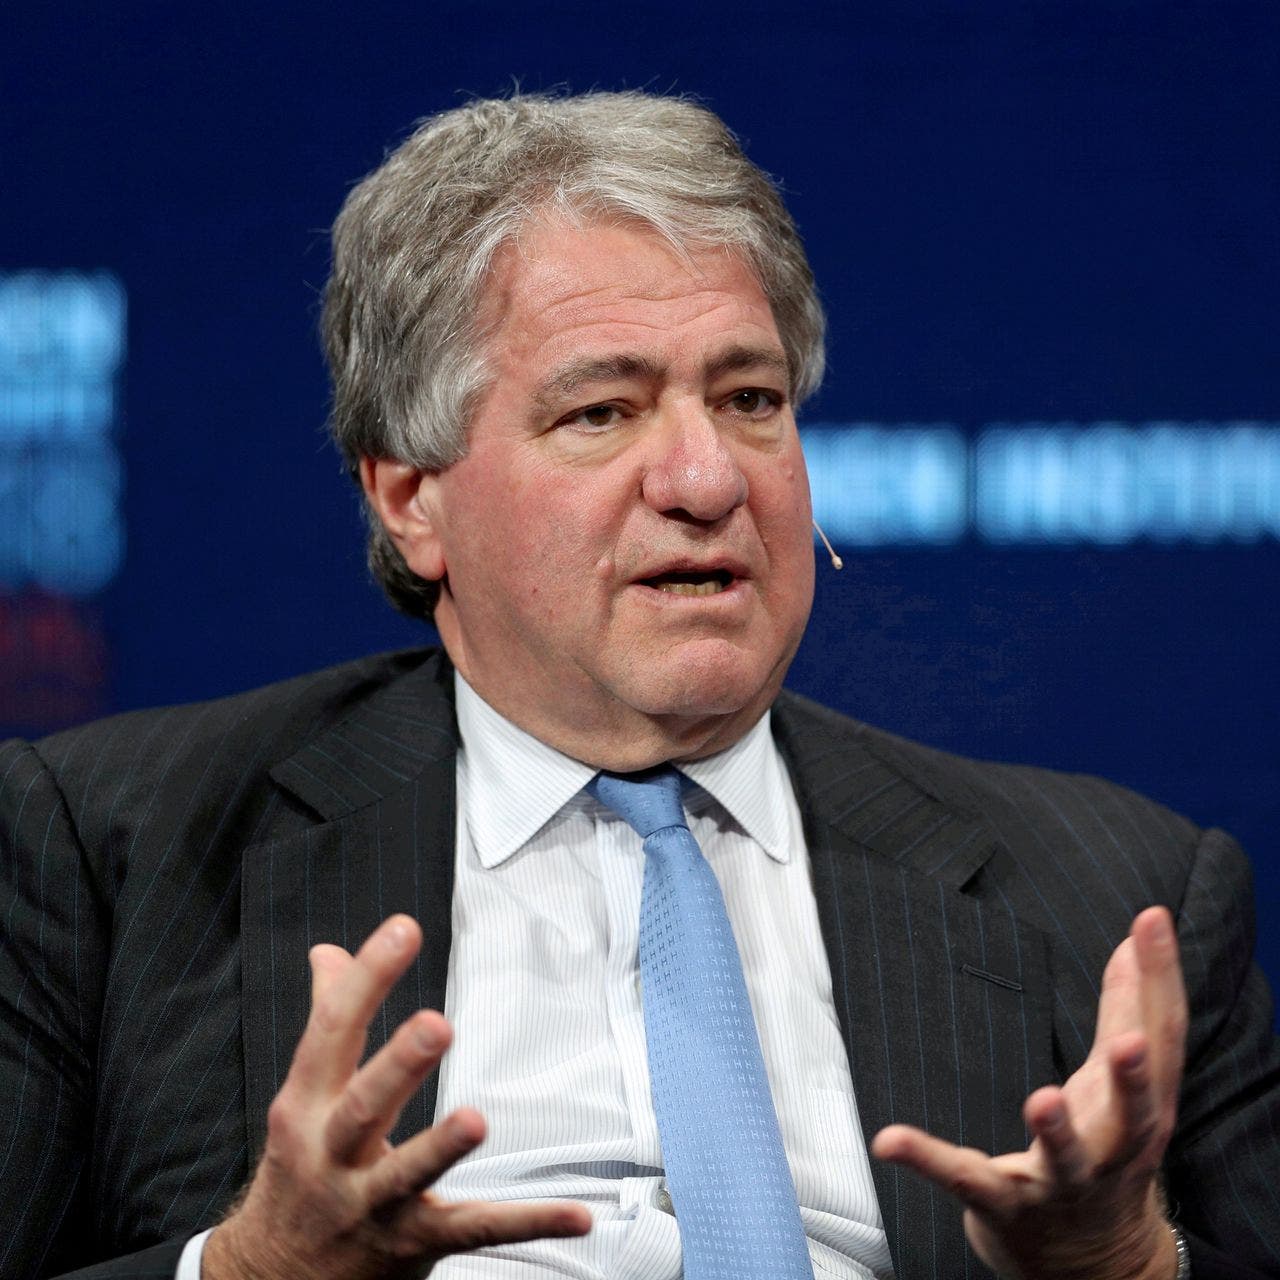 Leon Black flew model to Florida to have sex with Jeffrey Epstein, lawsuit claims